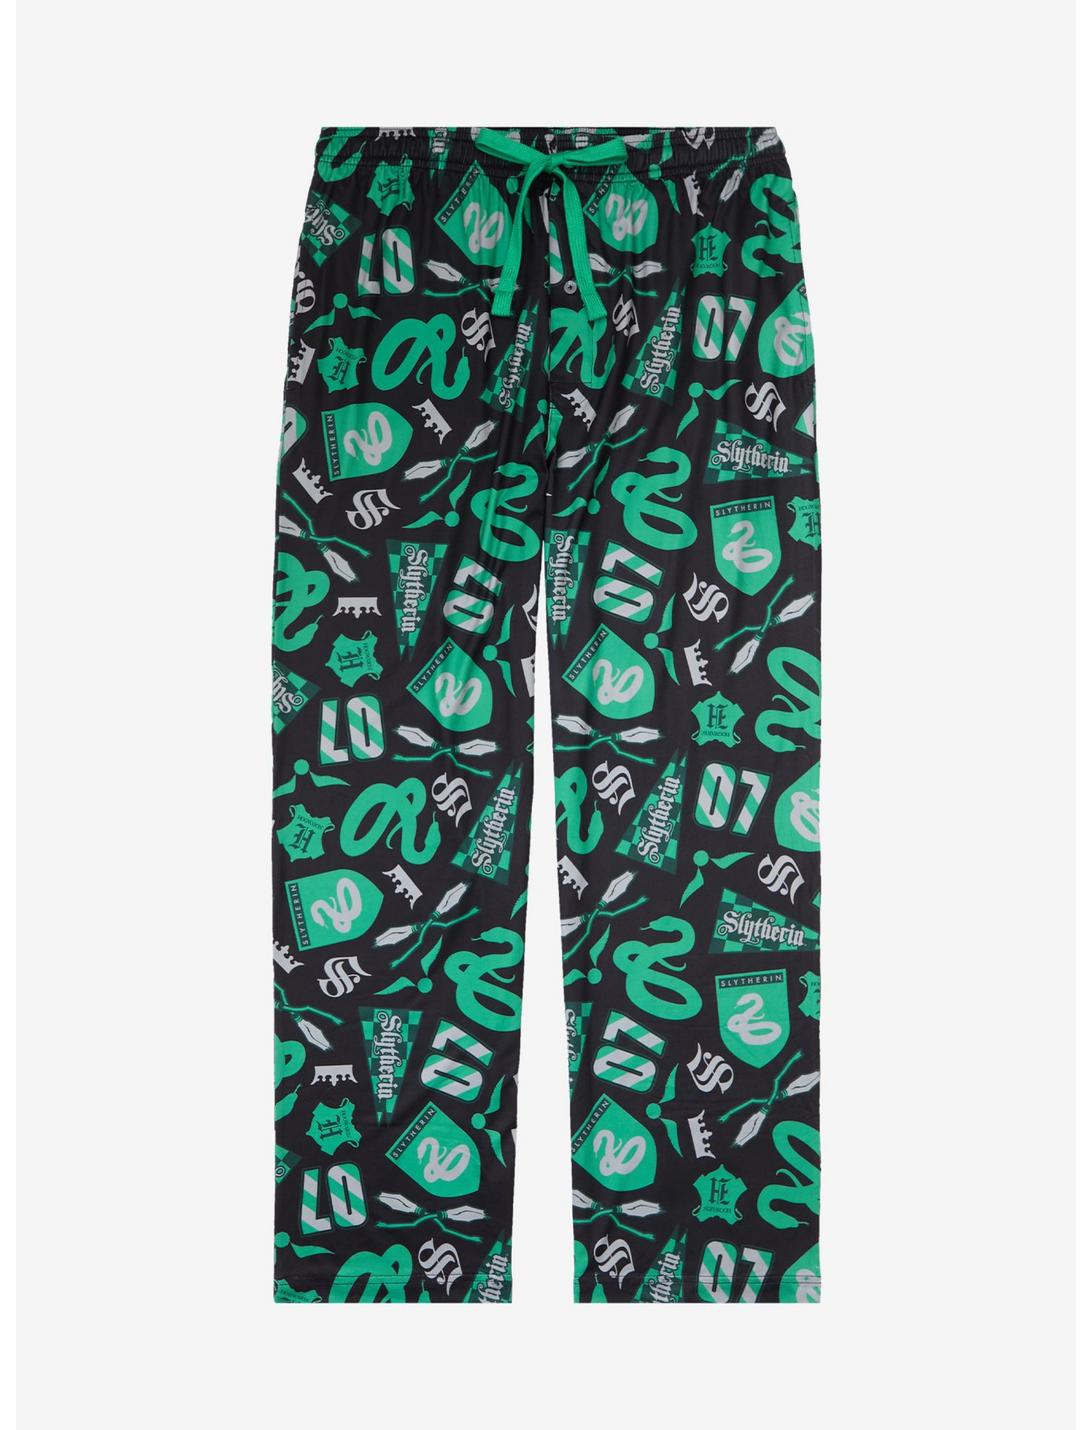 Harry Potter Slytherin Quidditch Allover Print Sleep Pants - BoxLunch Exclusive, GREEN, hi-res